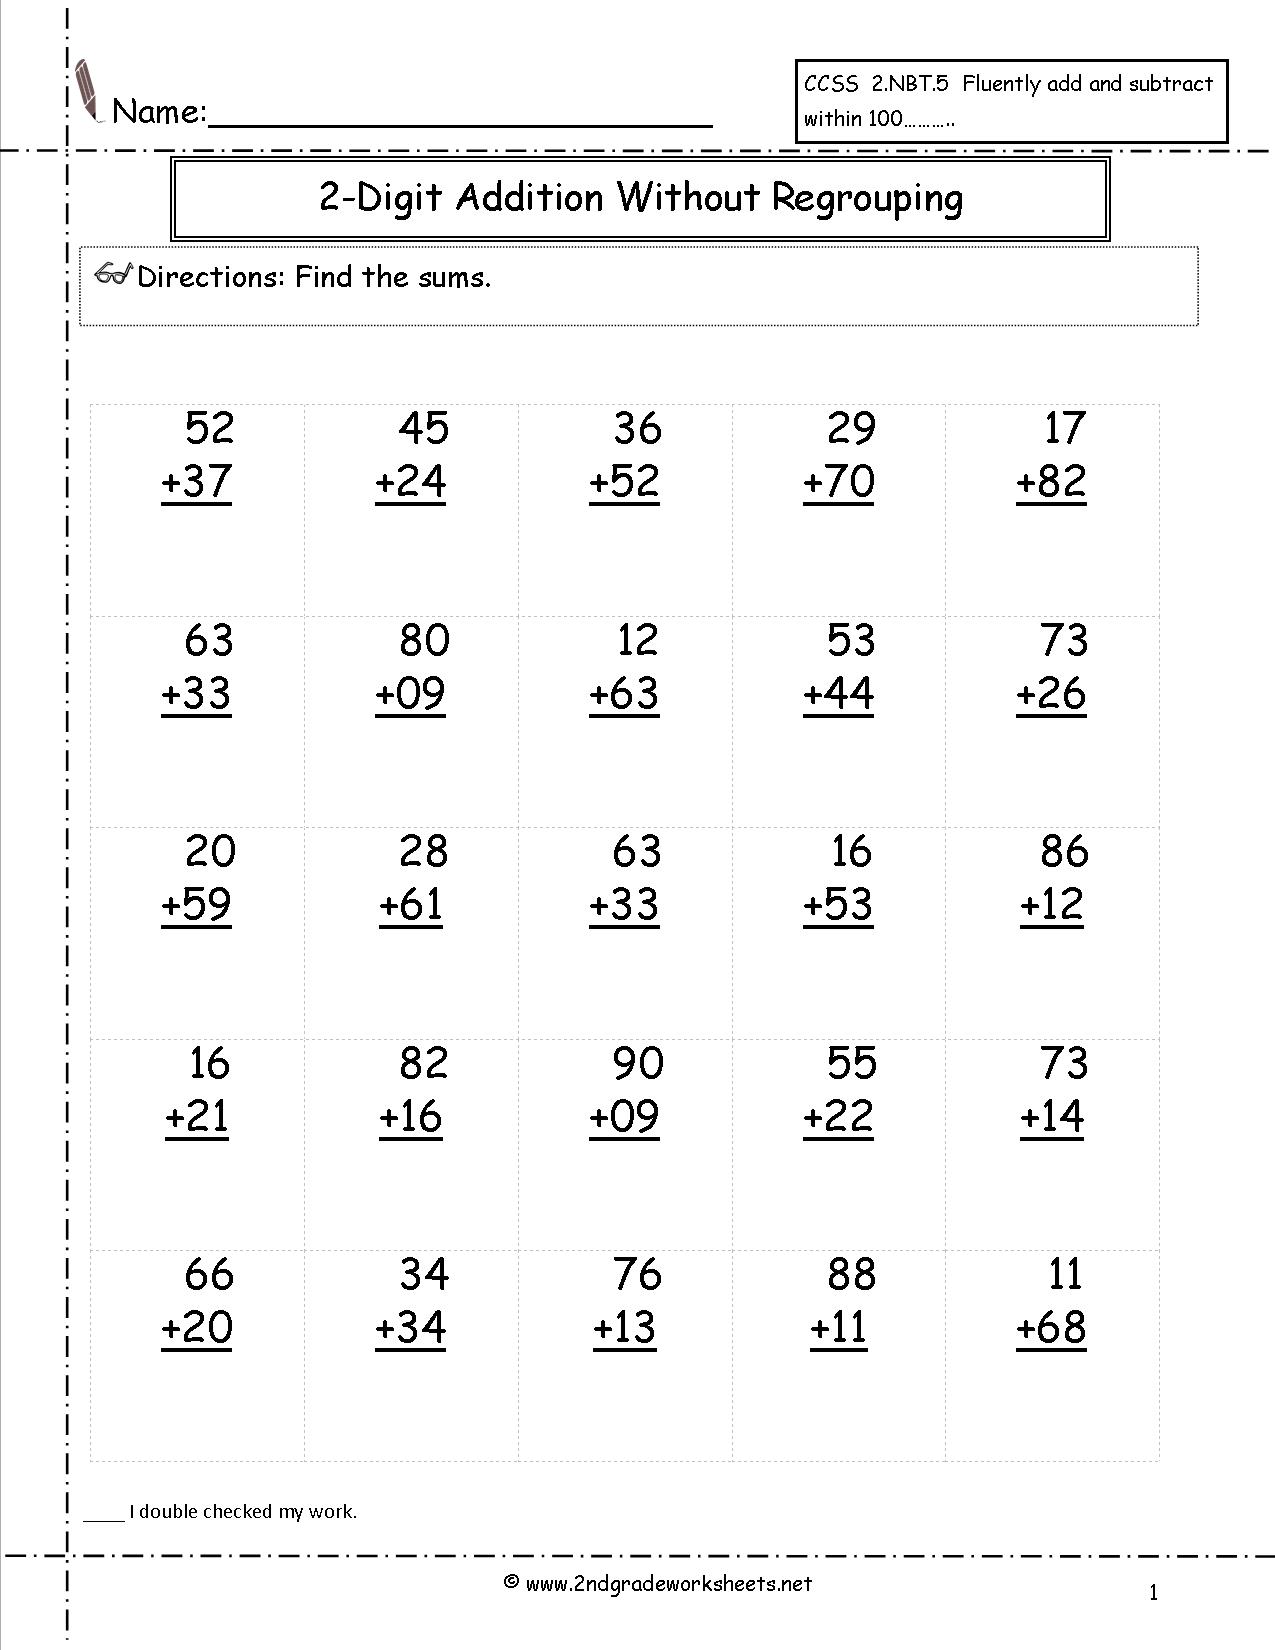 4-best-images-of-2nd-grade-regrouping-math-worksheets-free-printable